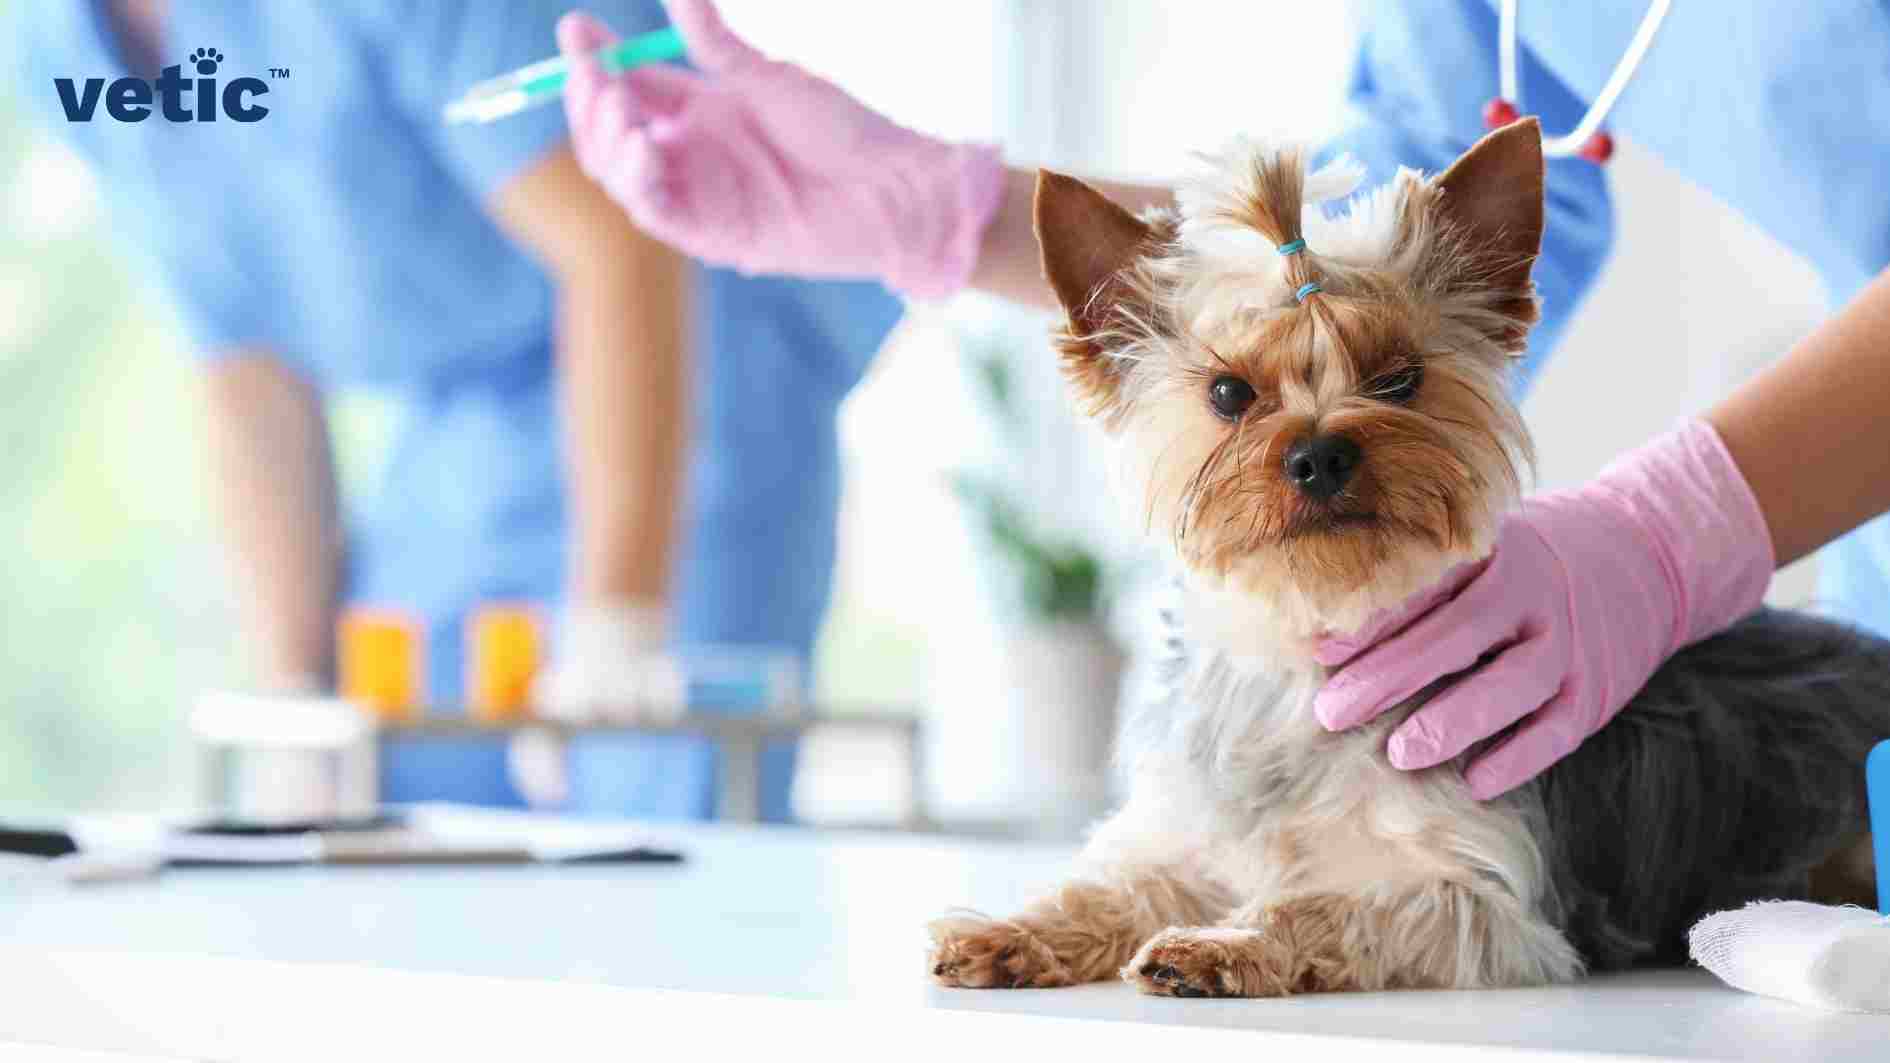 A Shih-Tzu puppy with a tan-black and white coat and two top knots looking at the camera as the vet holds a syringe filled with medicine in the background, to the top left of the dog's head. The image has a "vetic" copyright present on the top-left corner of the photo. The veterinarian is the best person to choose the right dewormers for your dog. The photo has been clicked inside a veterinary clinic, presumably Vetic Pet Clinic, since there are other veterinarians and blurred silhouettes of medical infra visible in the background.